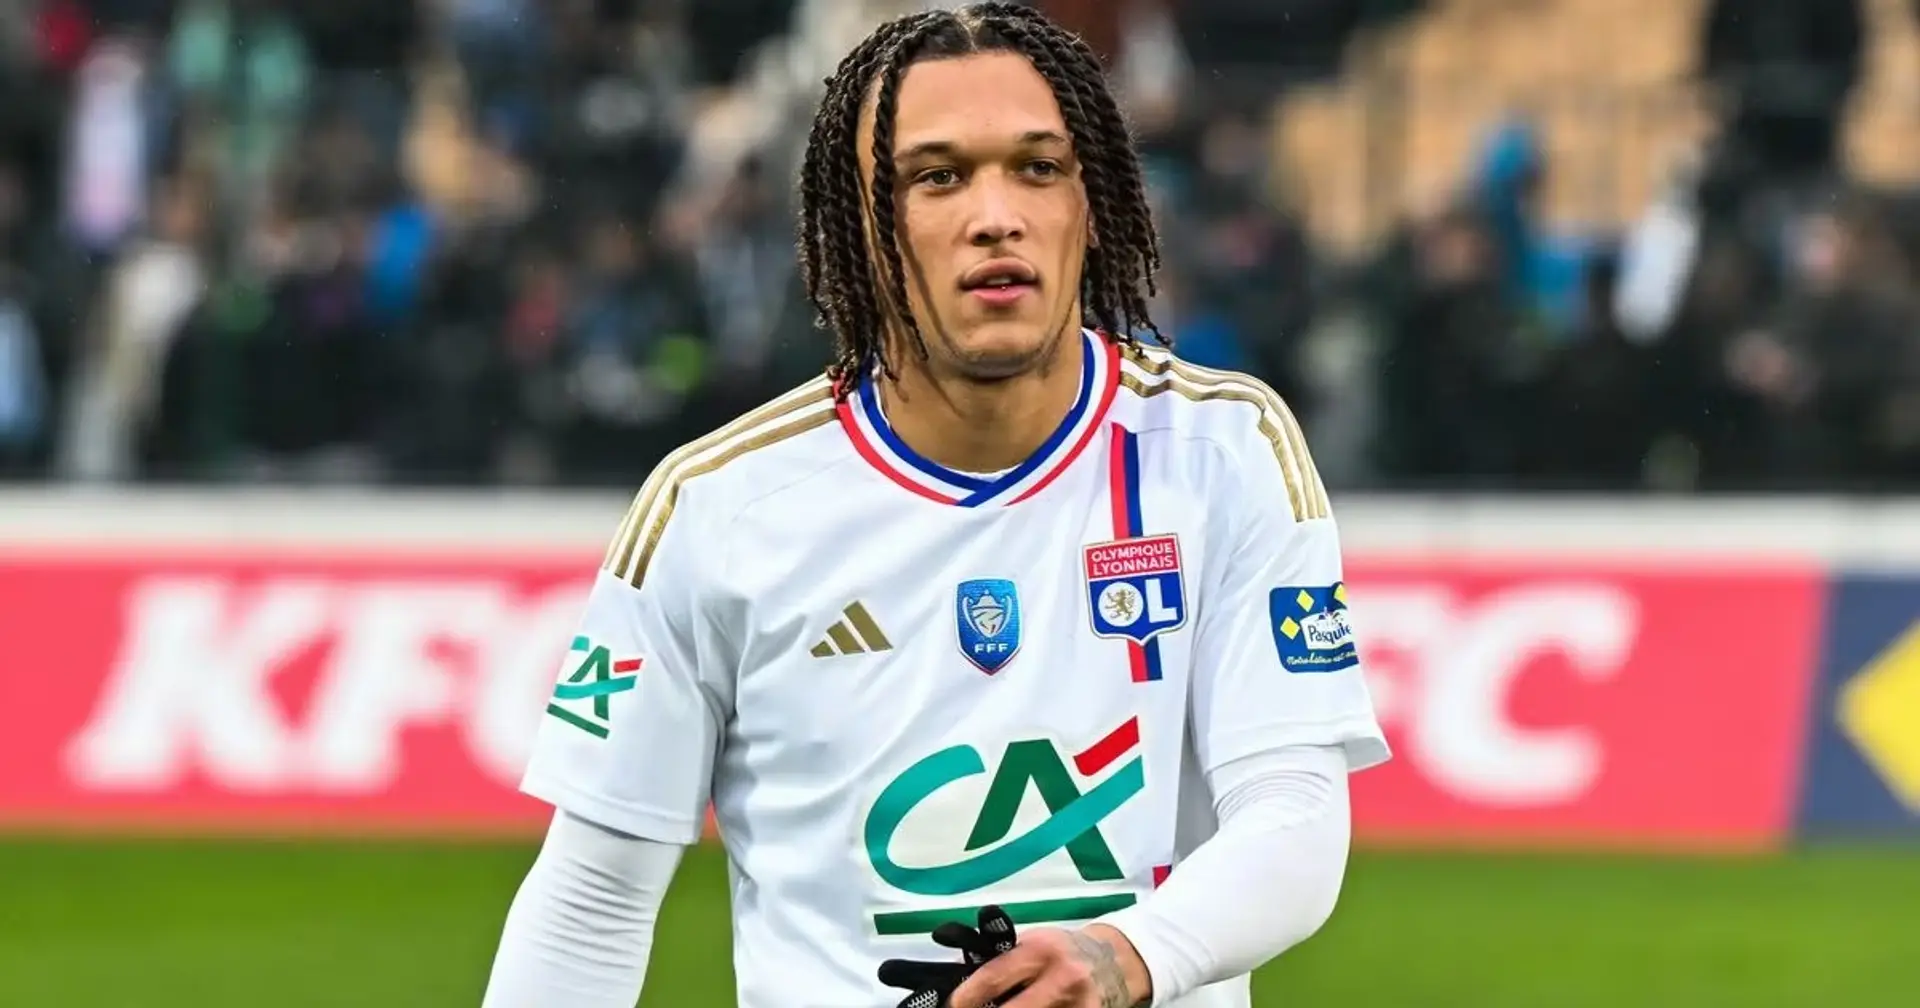 'I'm focused on Lyon': What Diego Moreira said last week before being recalled from Ligue 1 loan